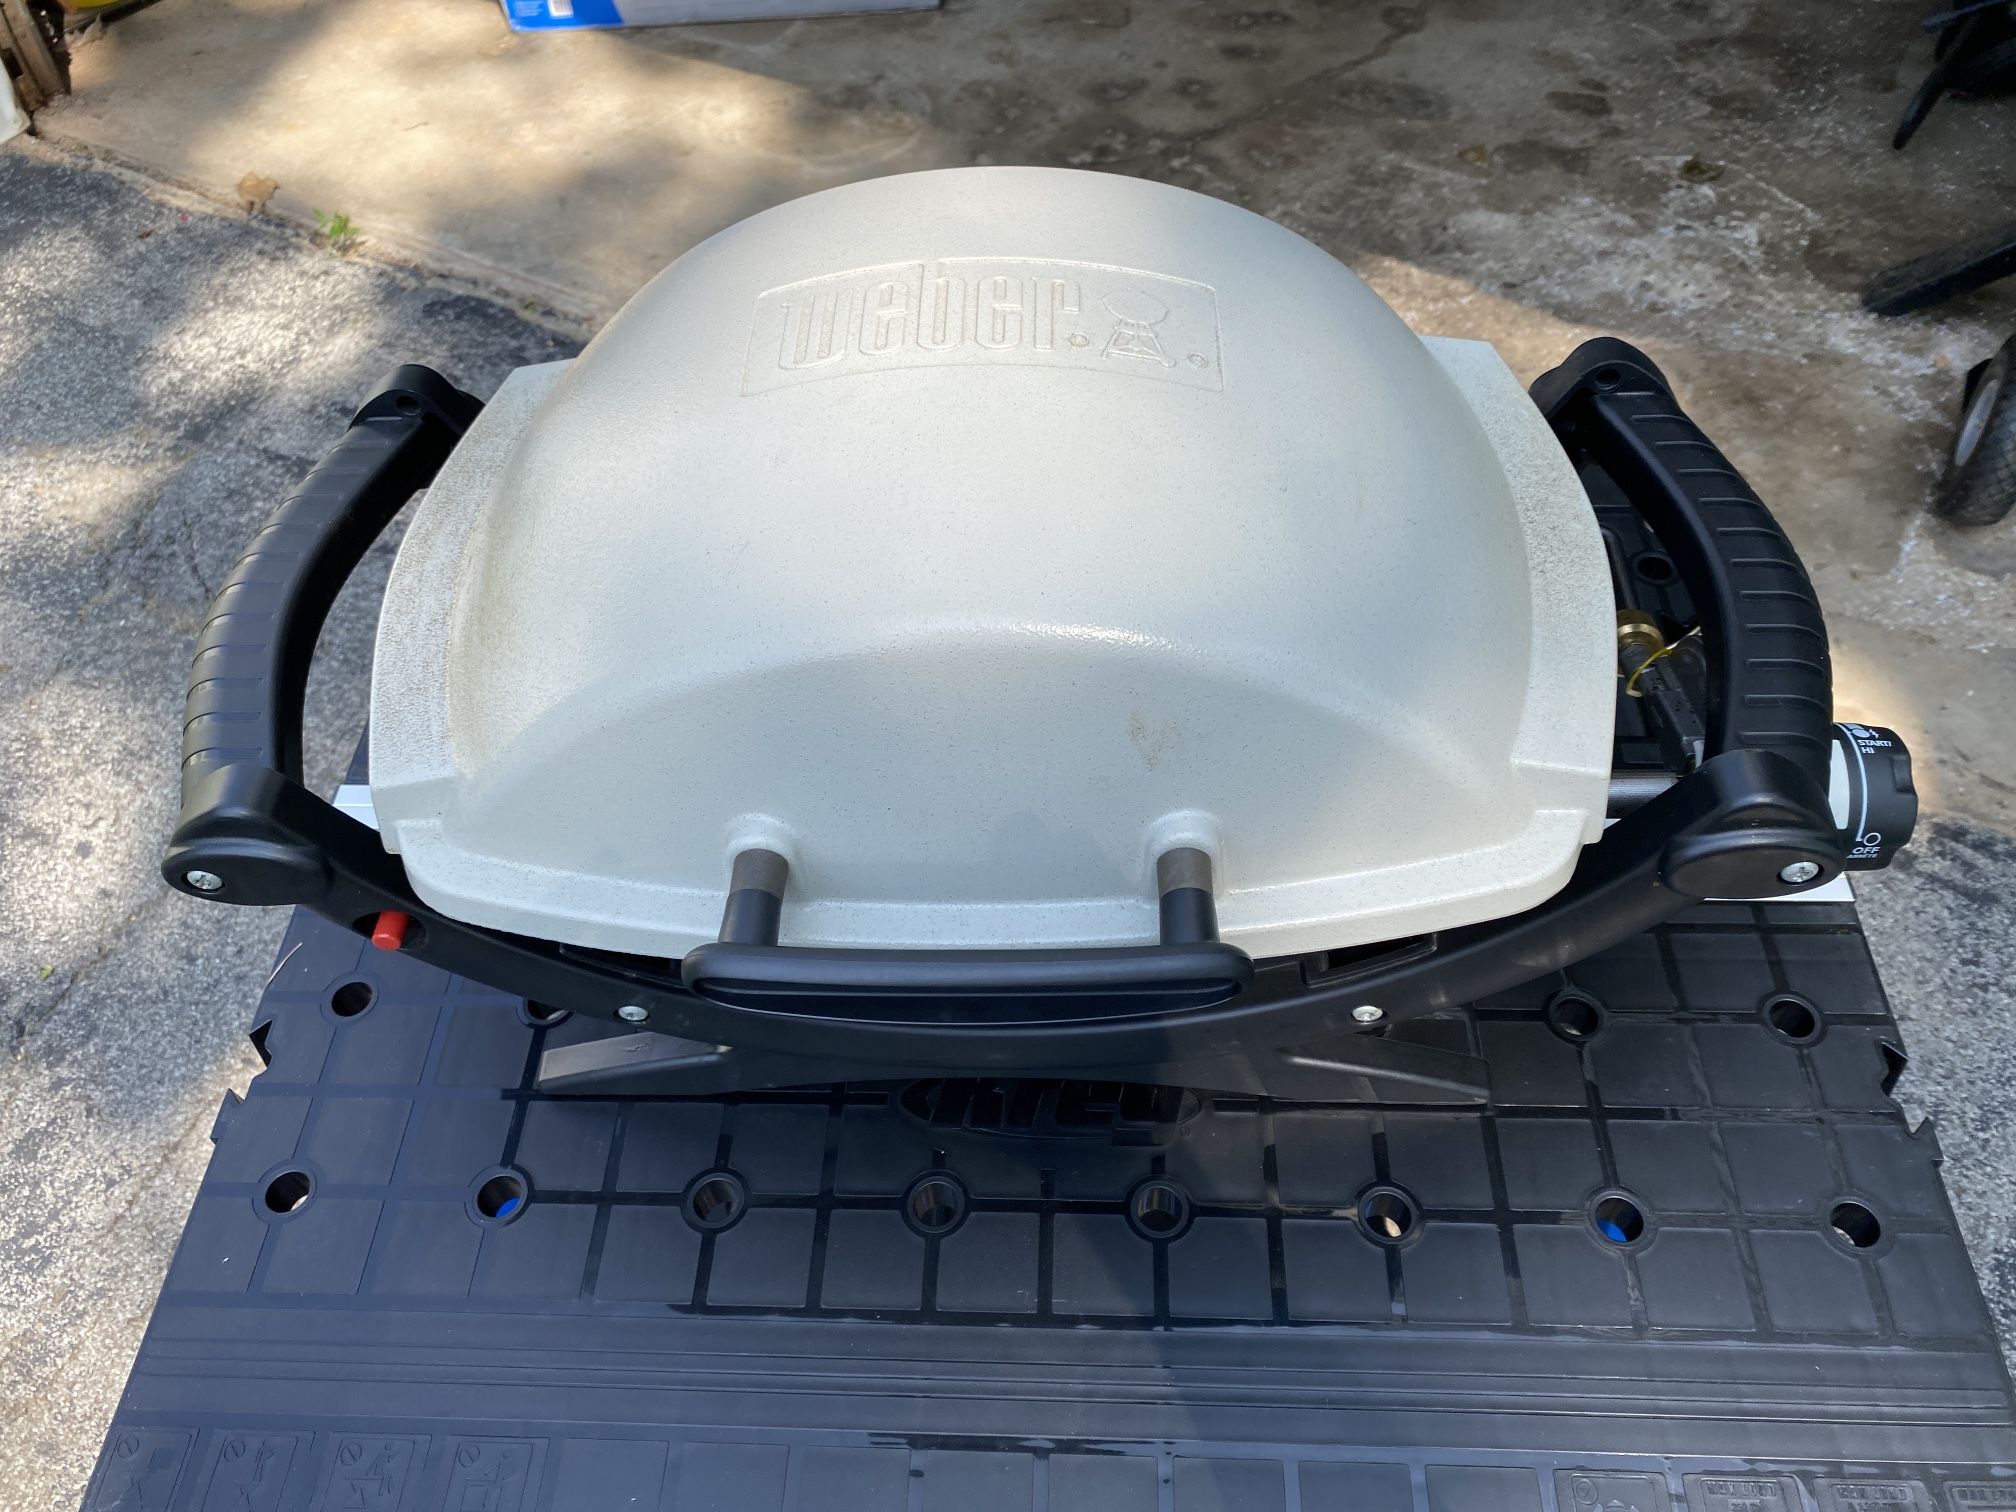 Weber Q1000 Portable BBQ Grill. Carry Case Included.